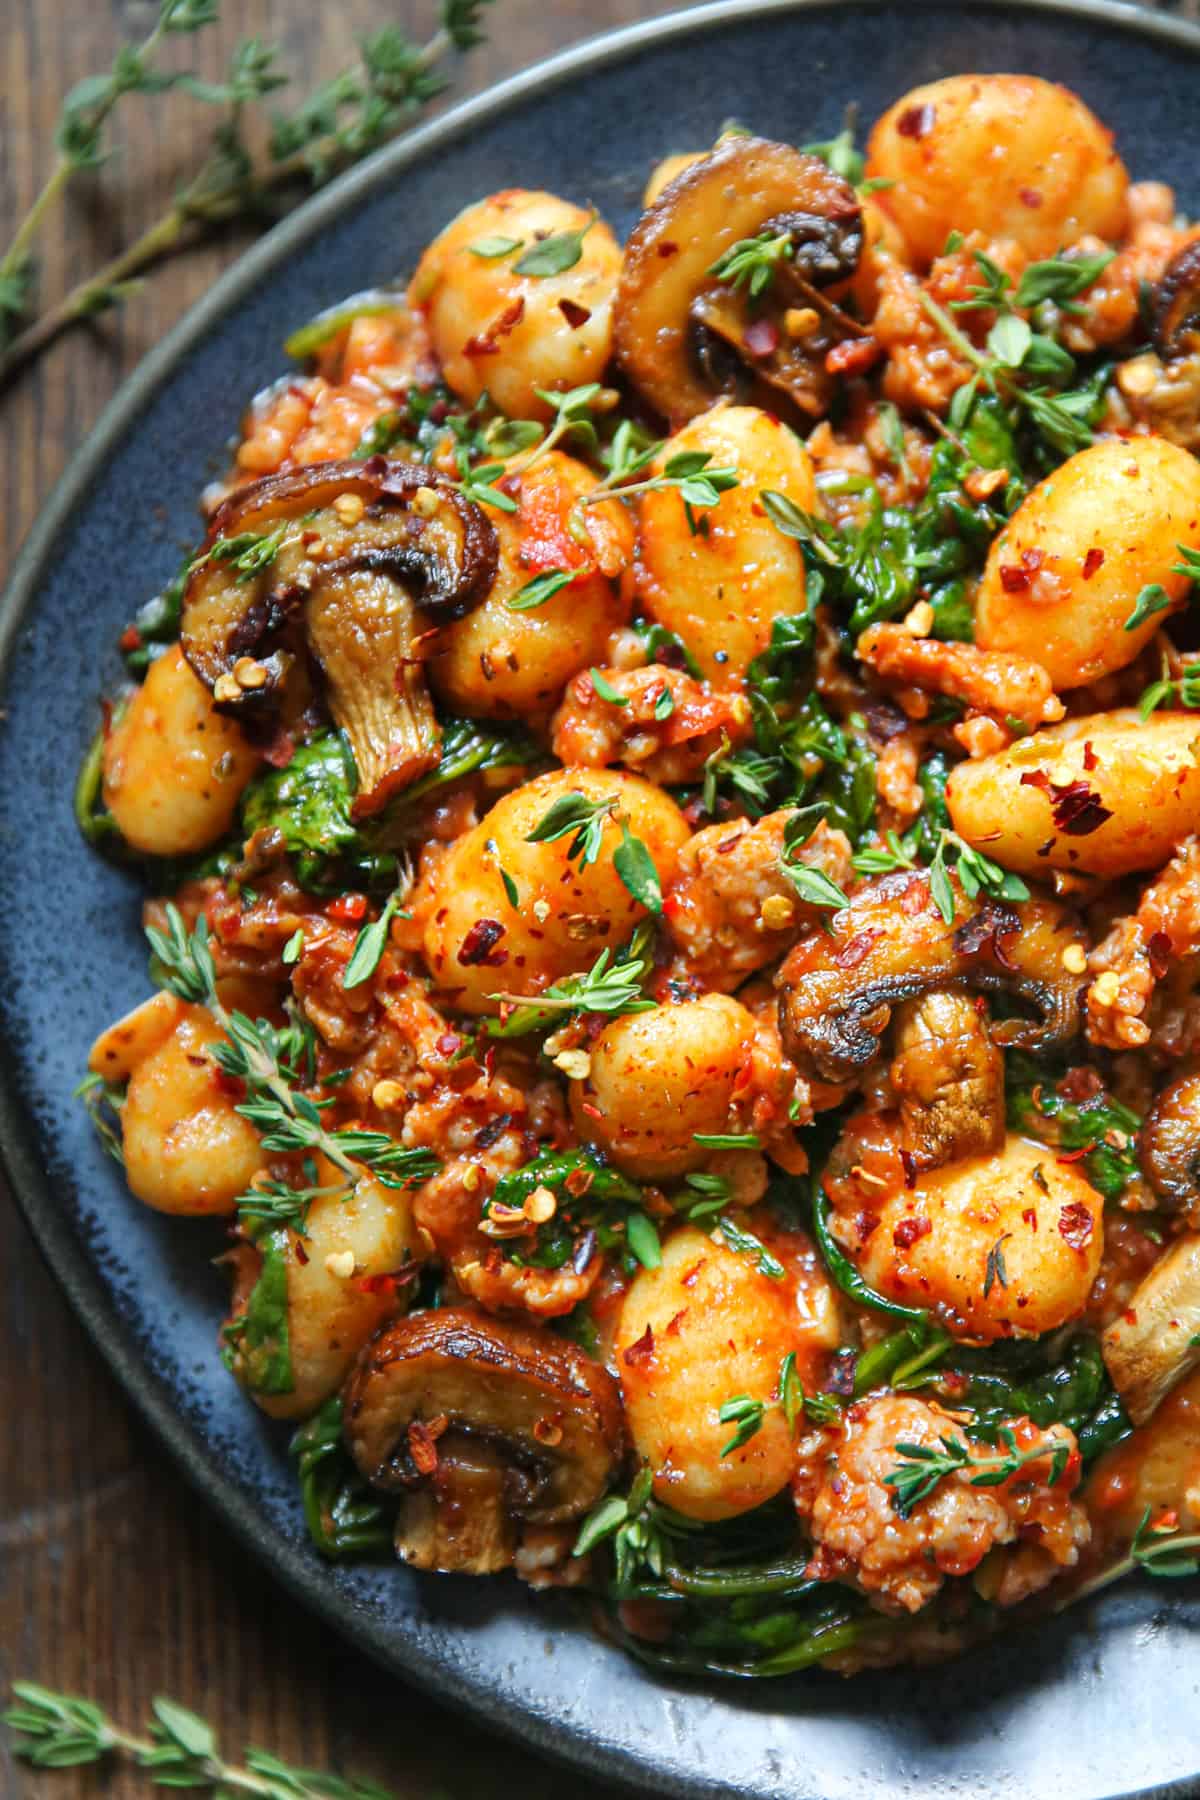 gnocchi with tomato sauce, sausage, spinach, and mushrooms on a blue plate.